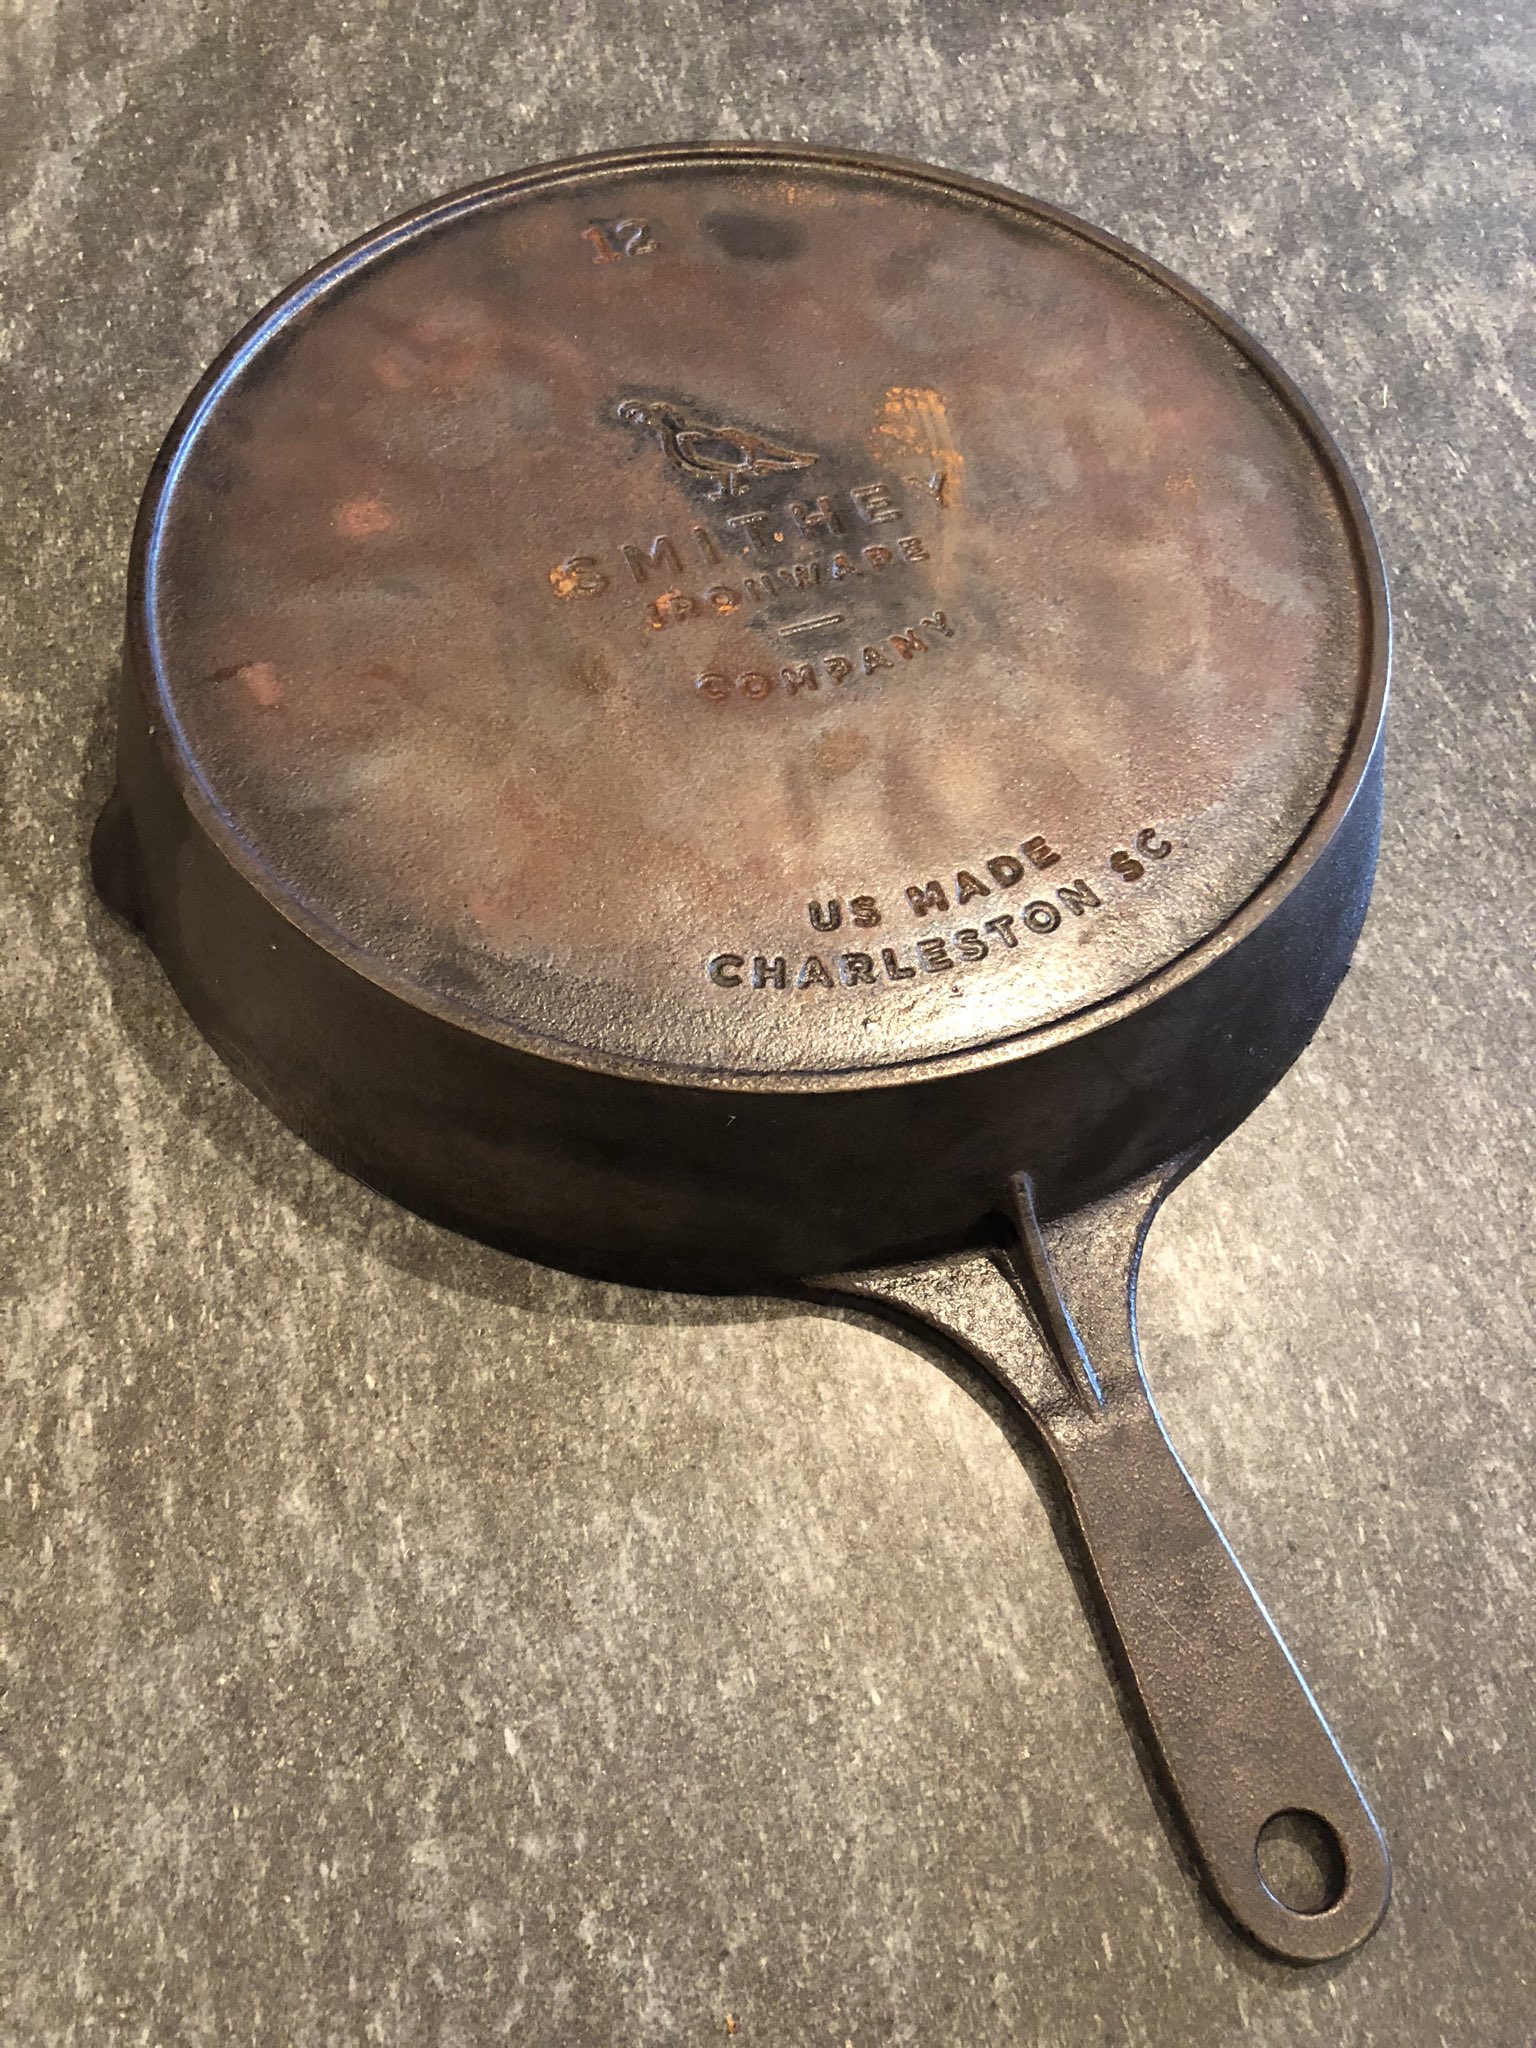 The Ultimate Way to Season Cast Iron